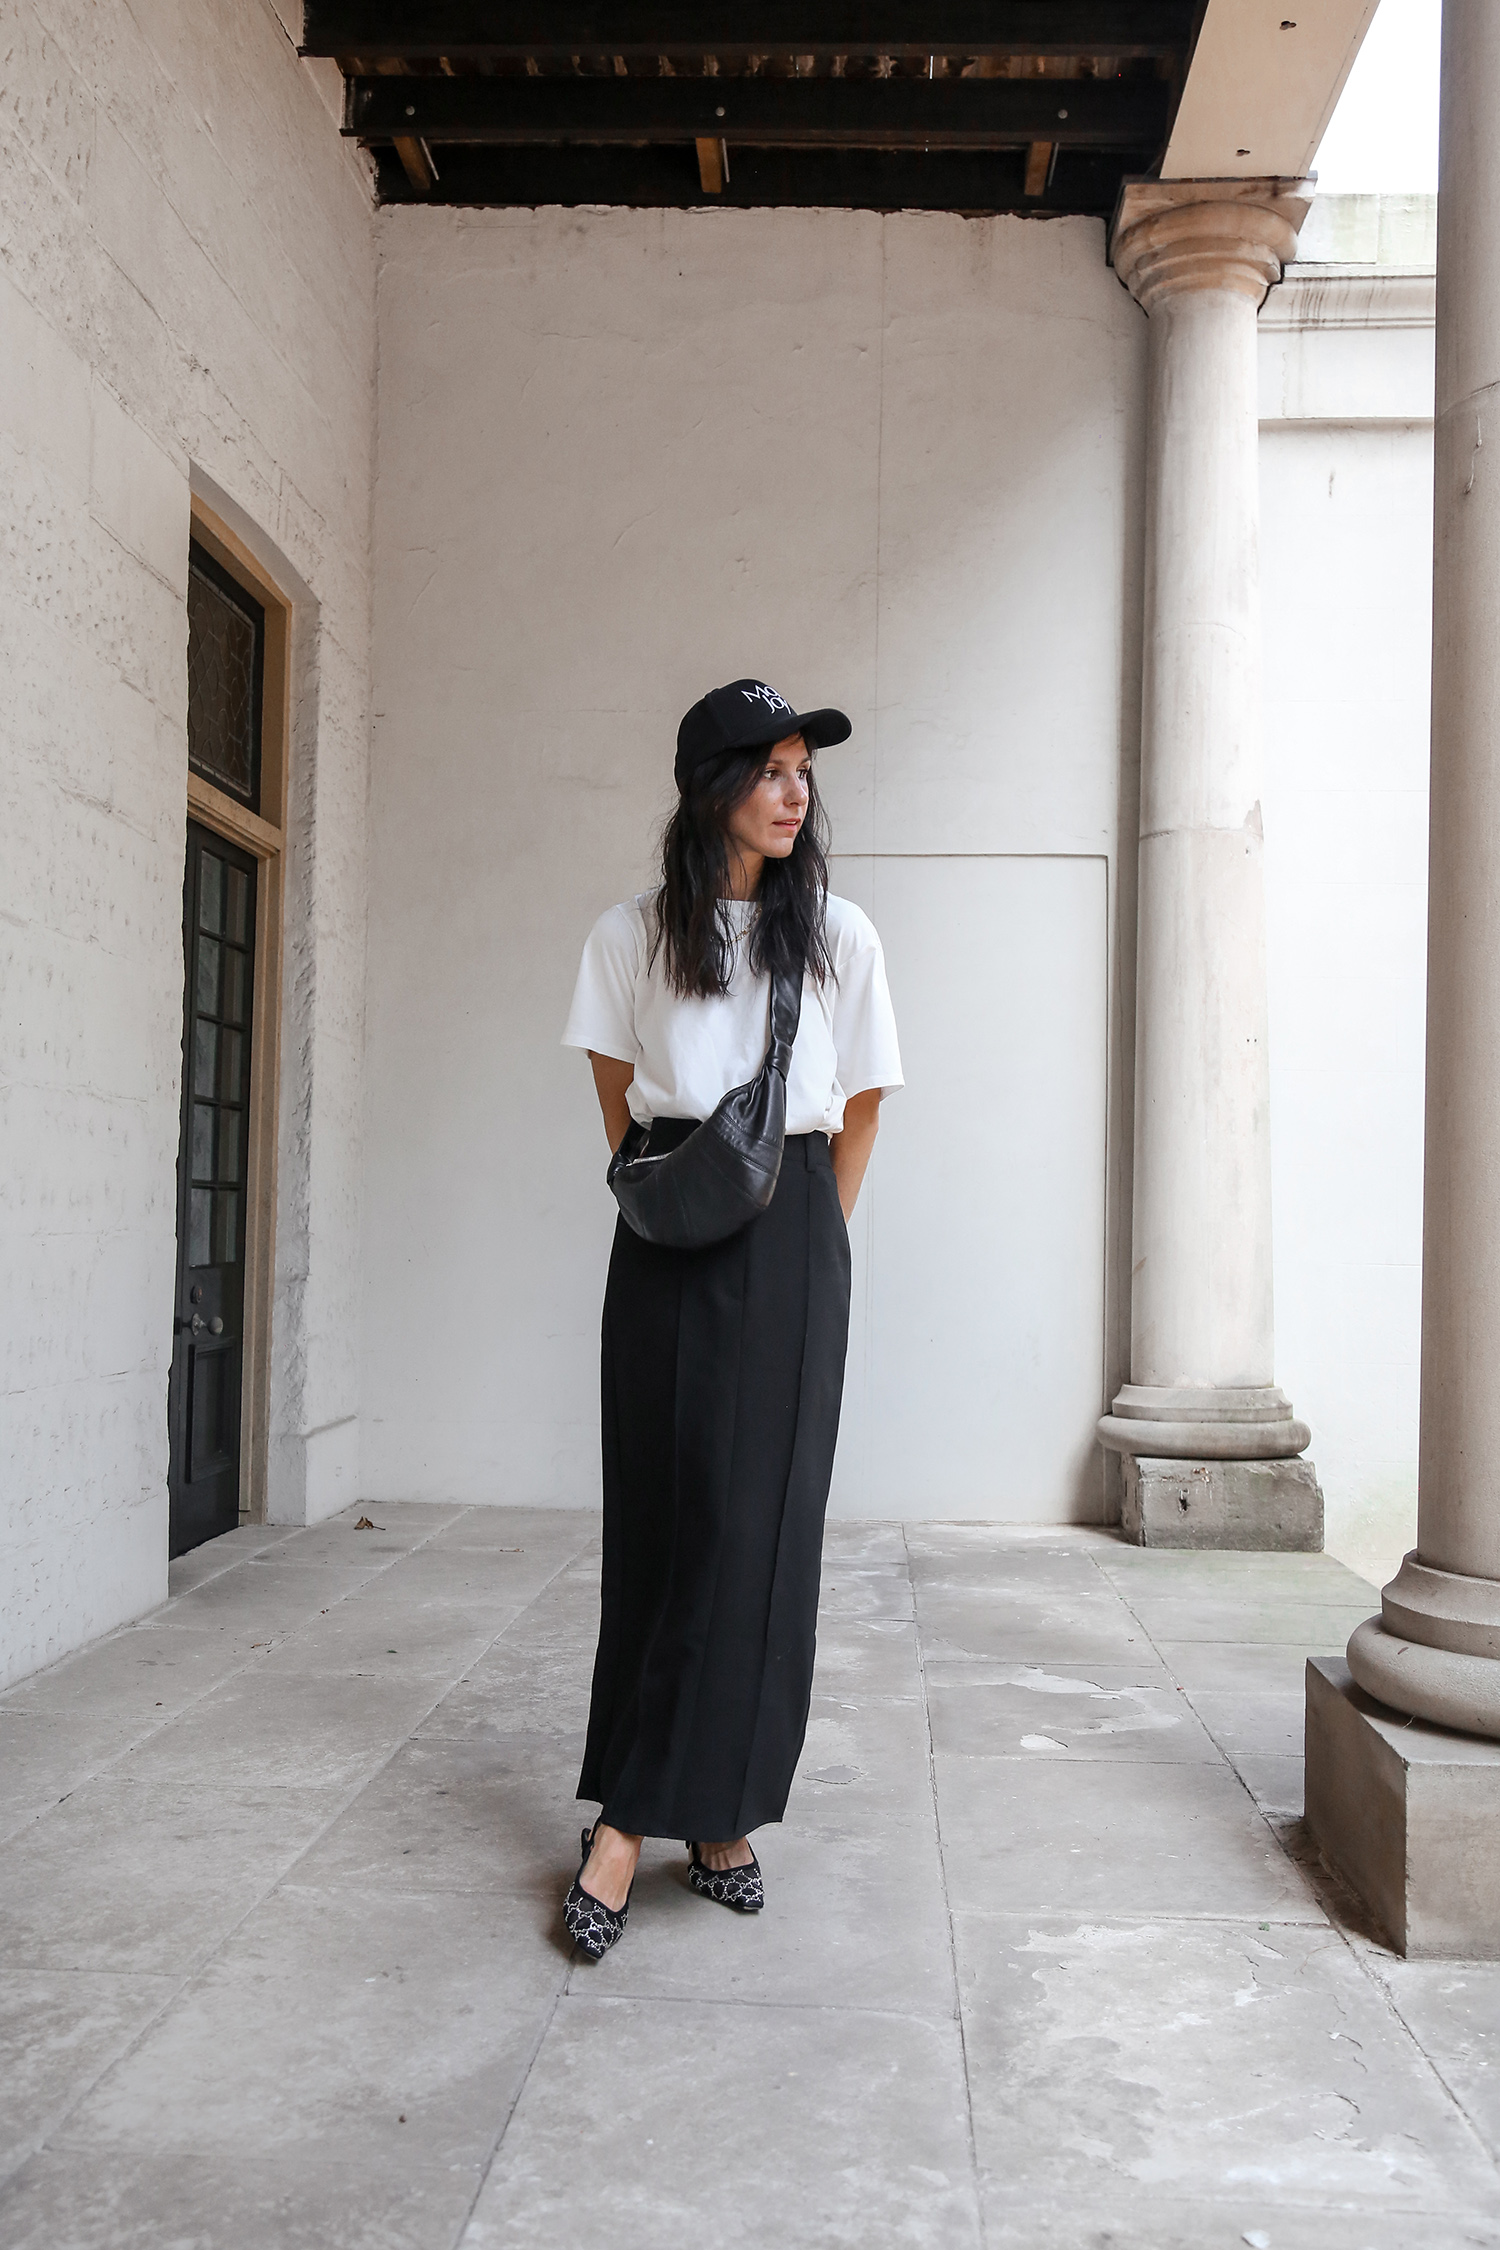 Minimalist styling wearing maxi length trouser skirt with Lemaire croissant bag